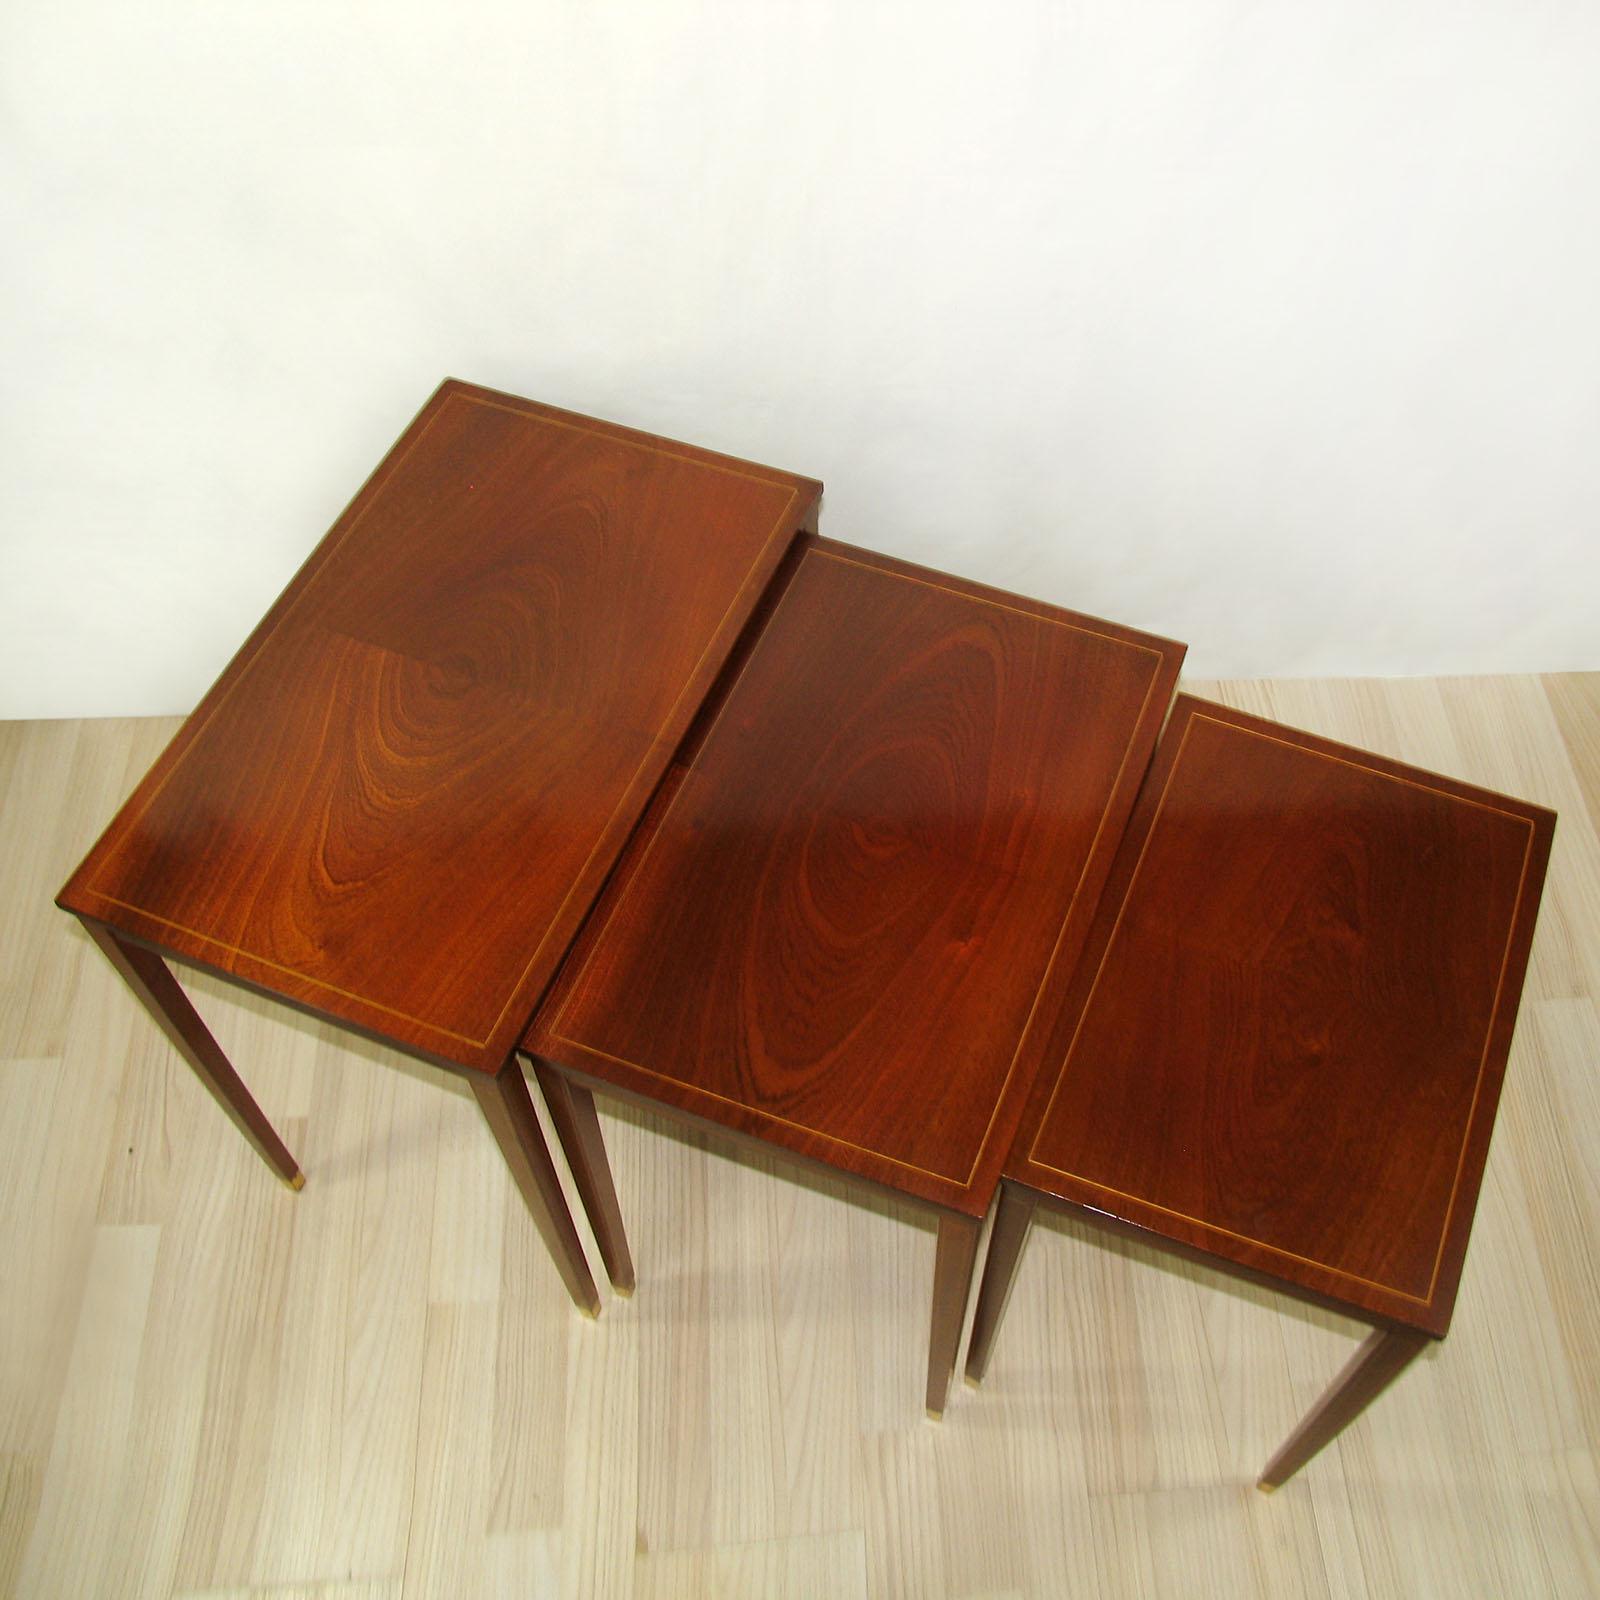 Mahogany Nesting Tables, Bodafors, Sweden, 1950s In Good Condition For Sale In Bochum, NRW